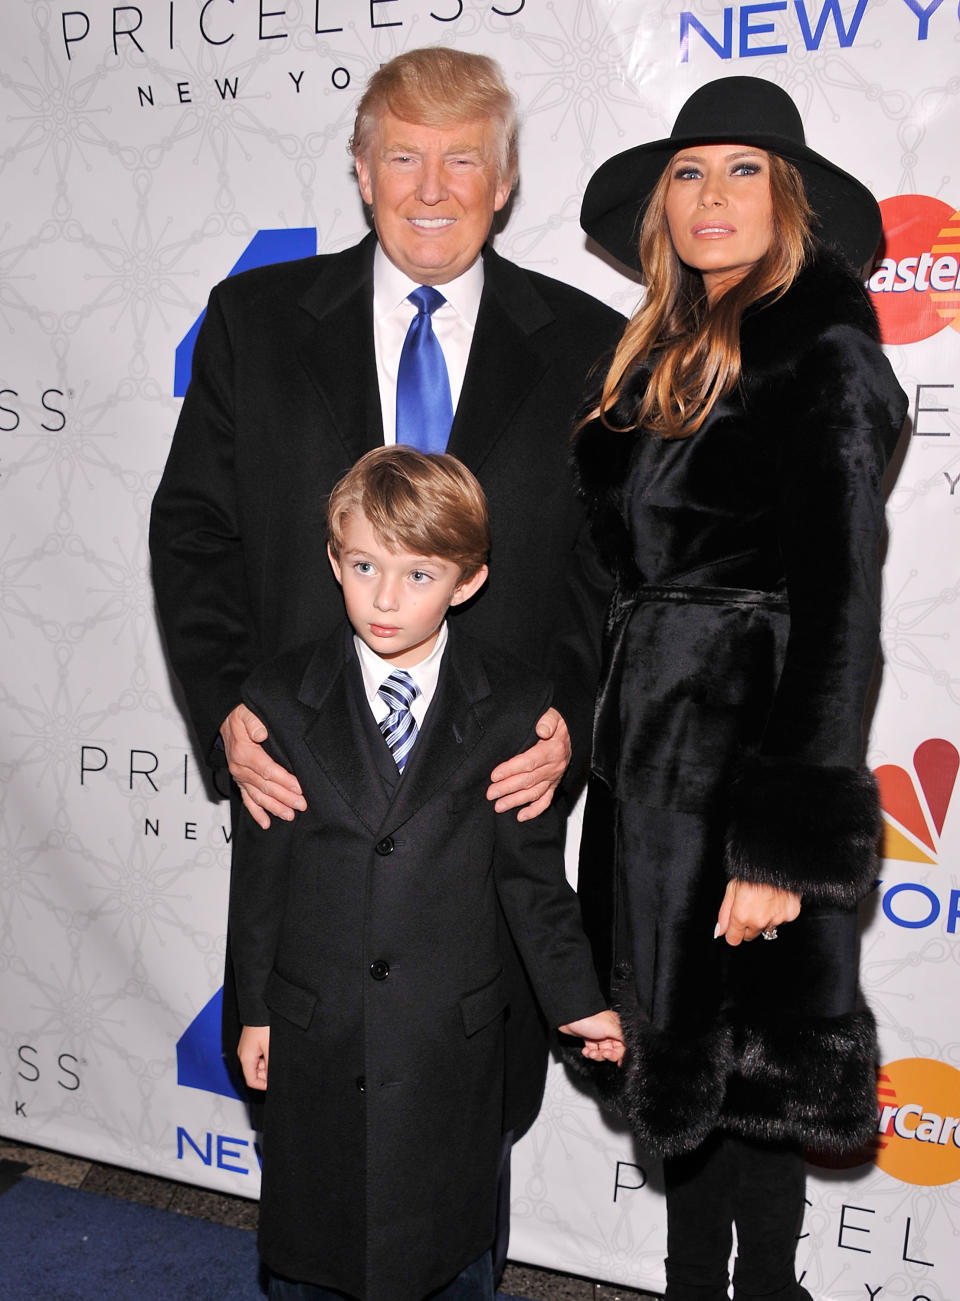 NEW YORK, NY - NOVEMBER 30: Donald Trump (L) and Melania Trump (R) and son Barron (C) attend Rockefeller Center Christmas Tree Lighting Party at Rock Center Cafe on November 30, 2011 in New York City. (Photo by Gary Gershoff/Getty Images for NBC)